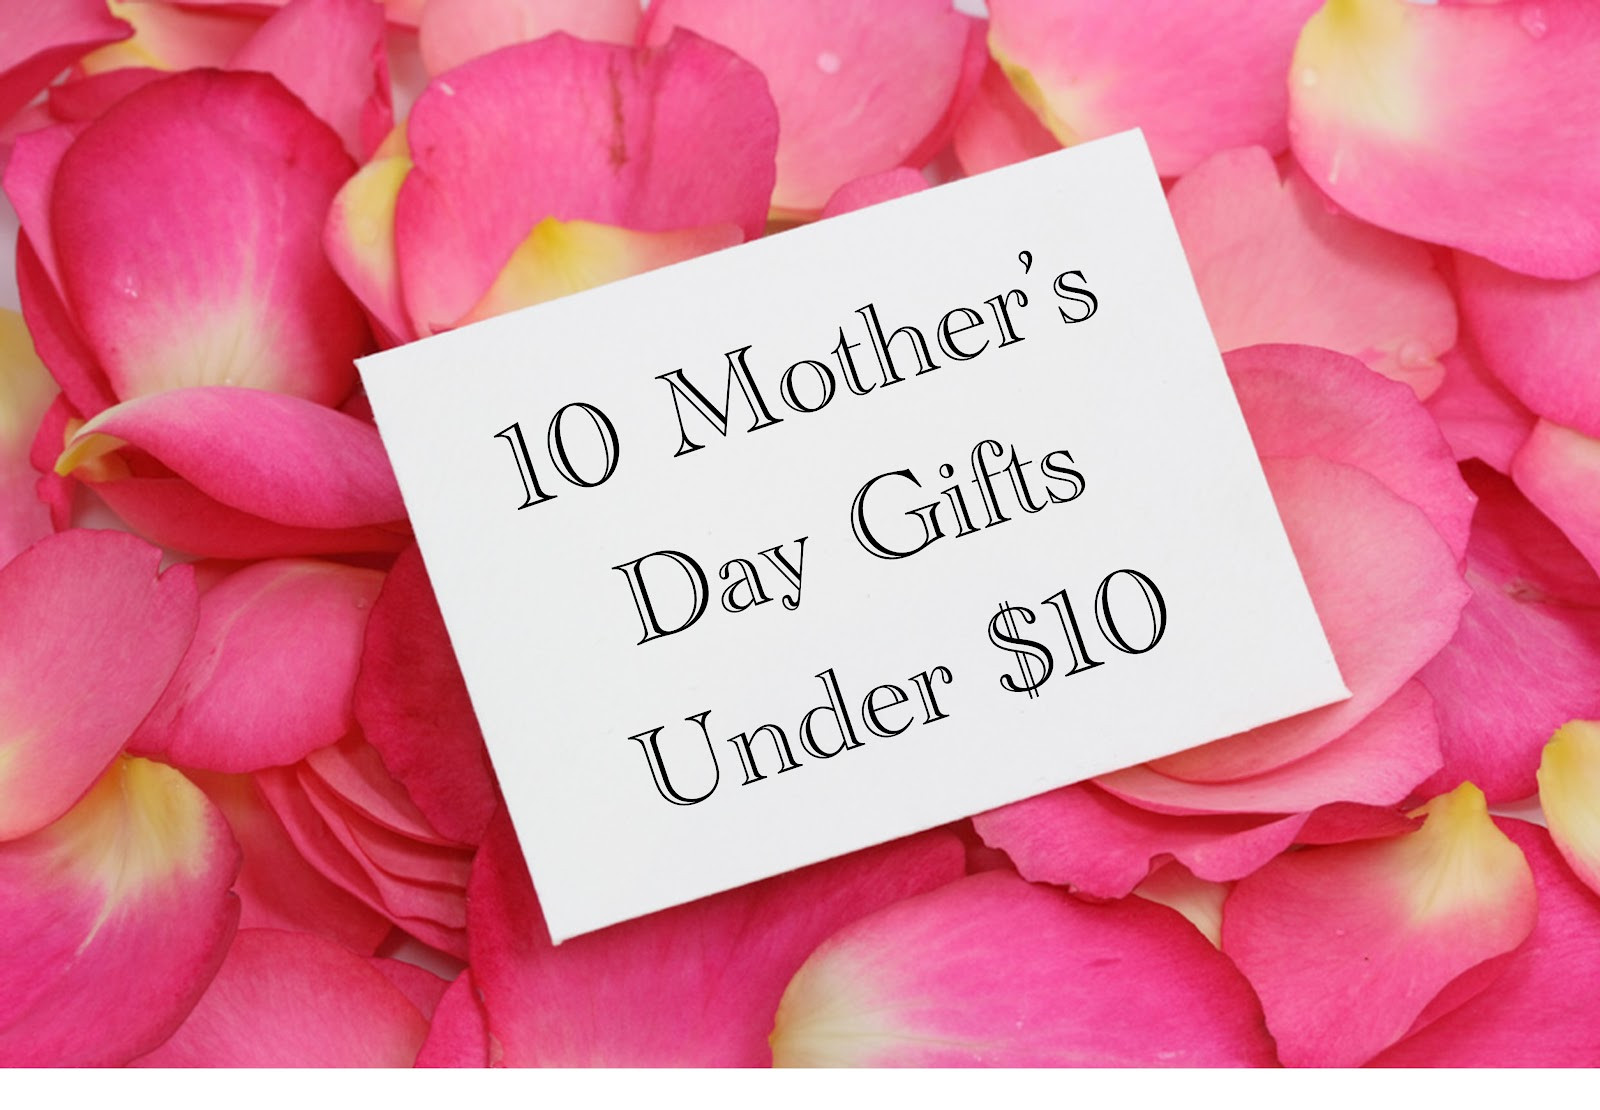 Mothers Day Gifts Under $10
 Life s Joy 10 Mother s Day Gifts Under $10